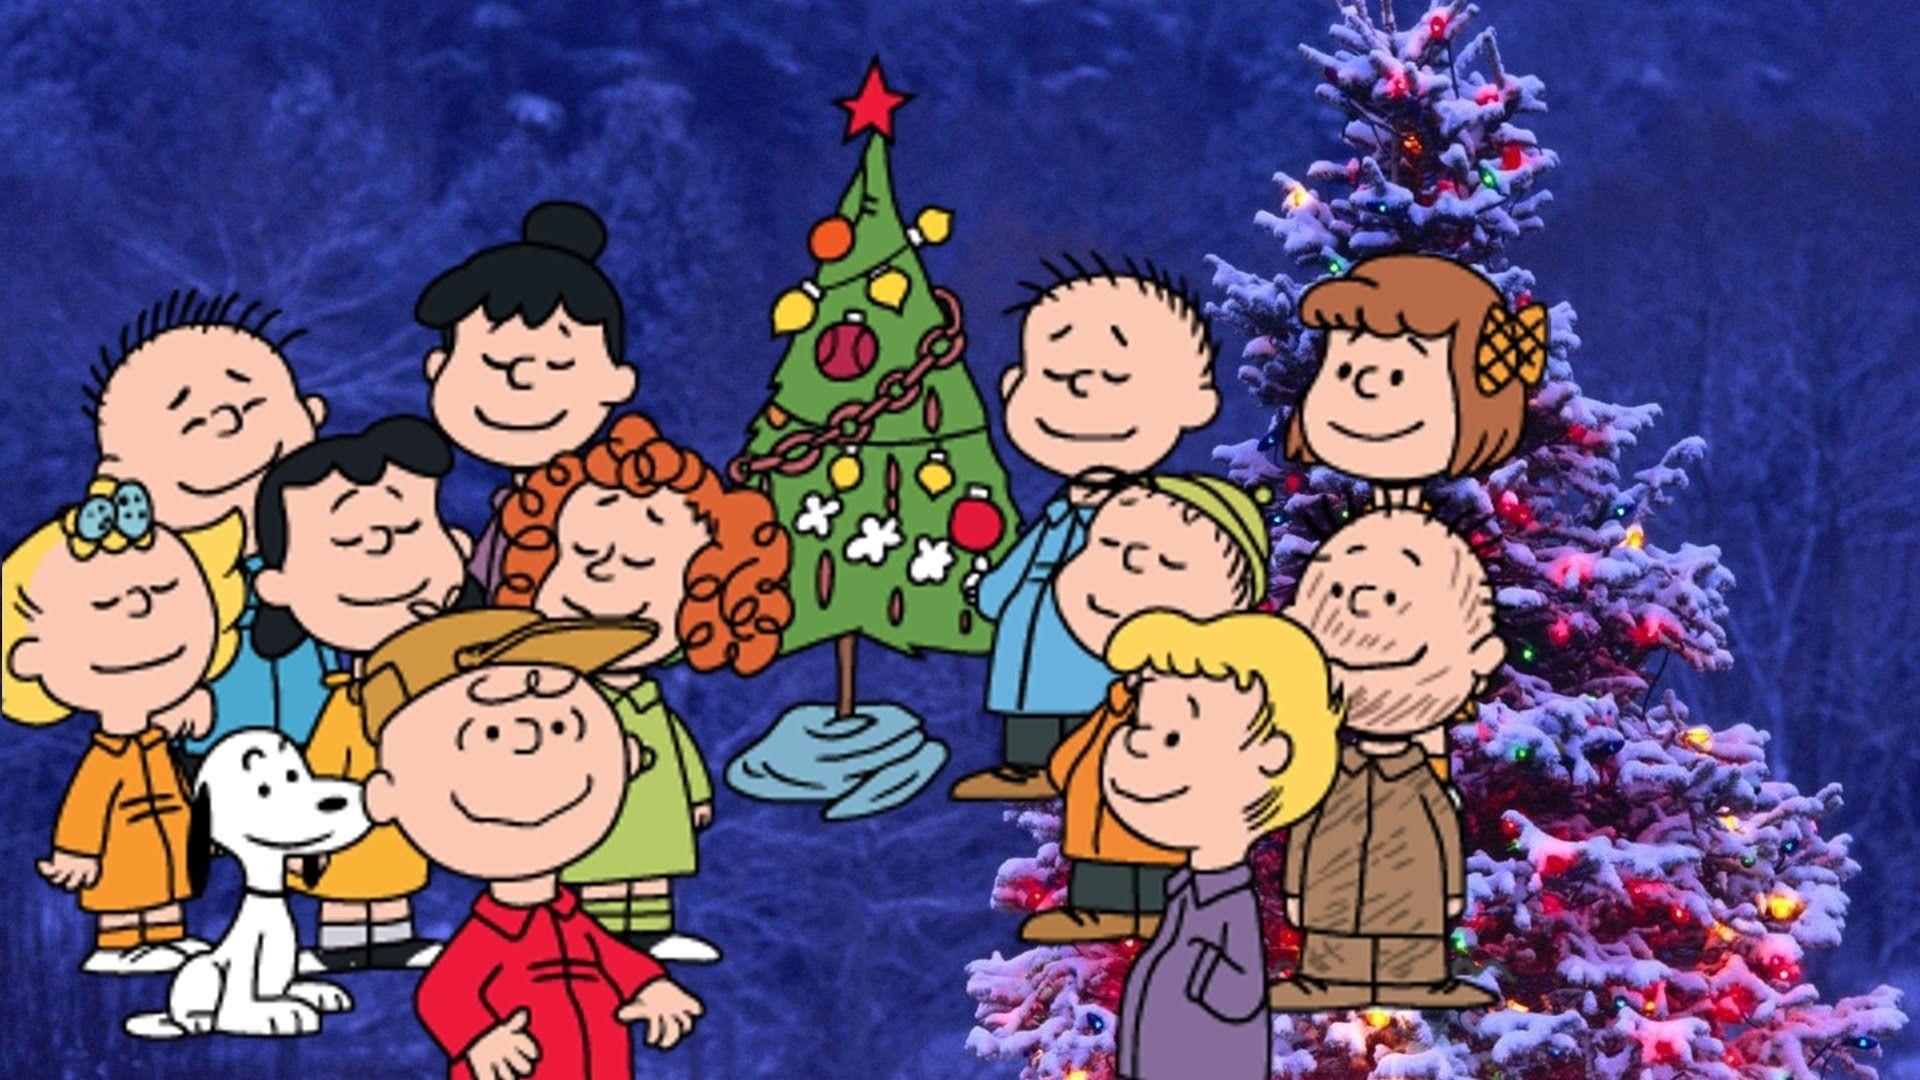 Snoopy Is Celebrating Christmas With Friends HD Snoopy Christmas Wallpapers   HD Wallpapers  ID 55044